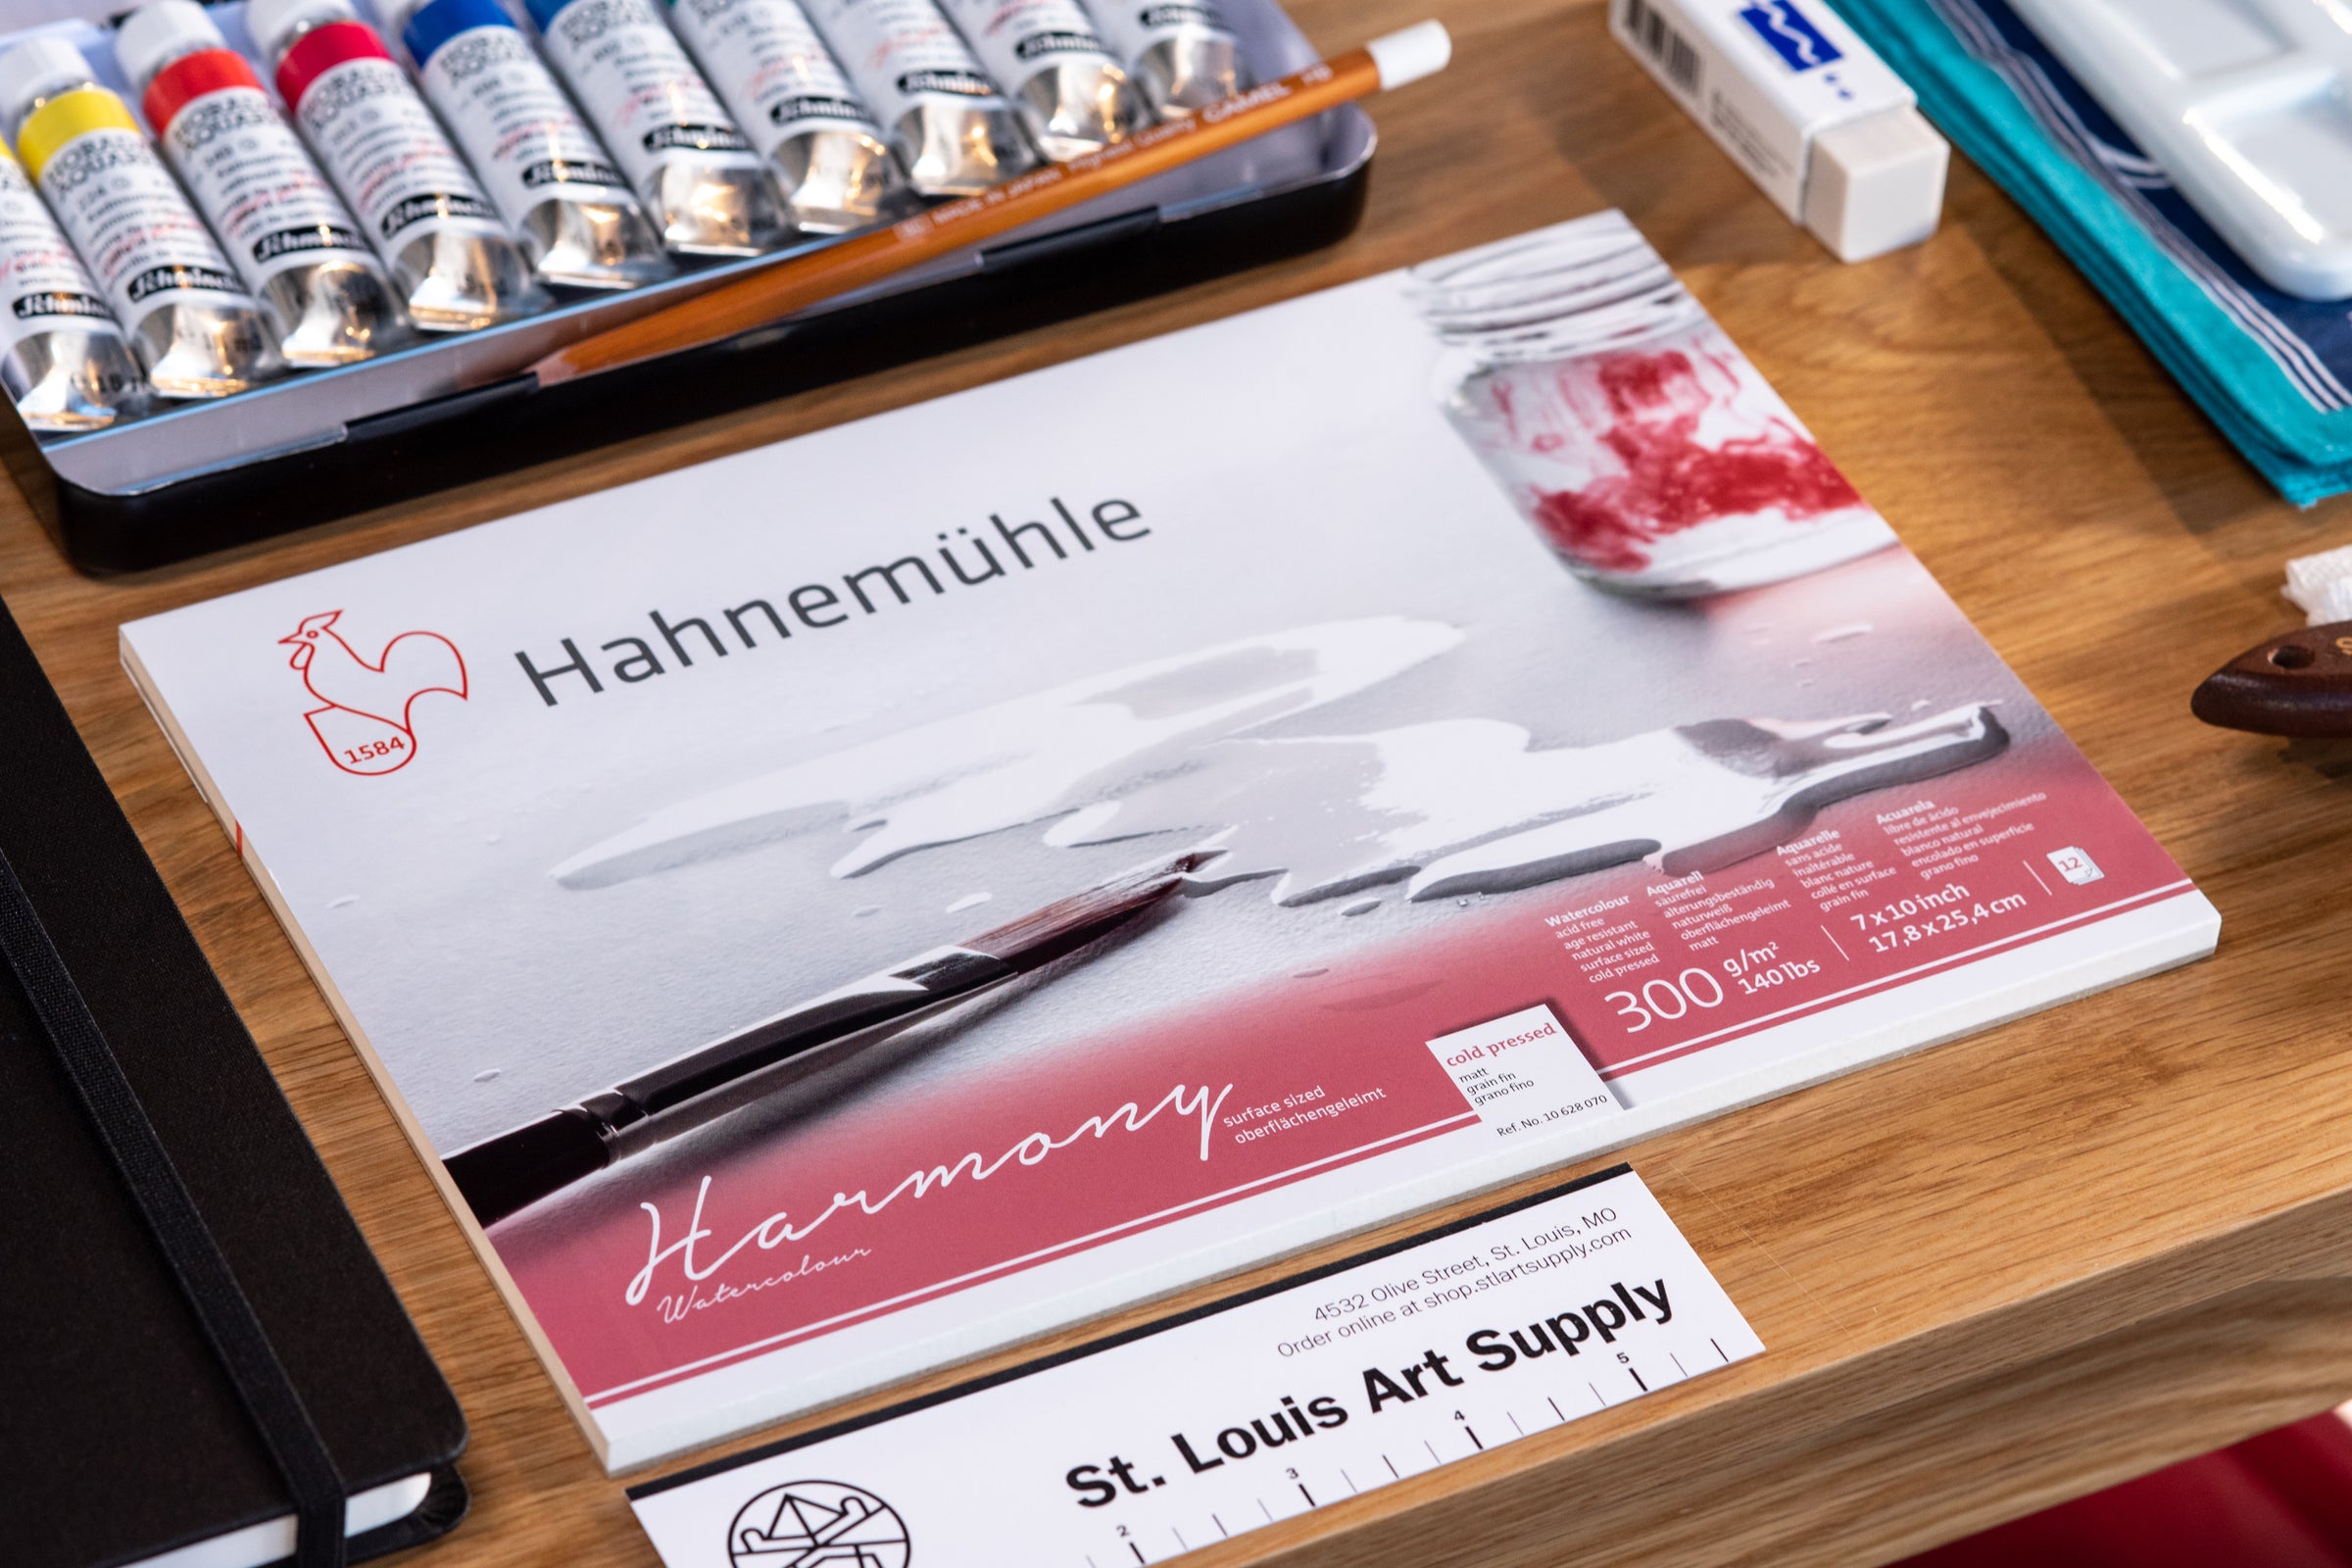 Hahnemühle Watercolor 9 x 12 Pad, 12 Sheets, Cold Press – ARCH Art Supplies